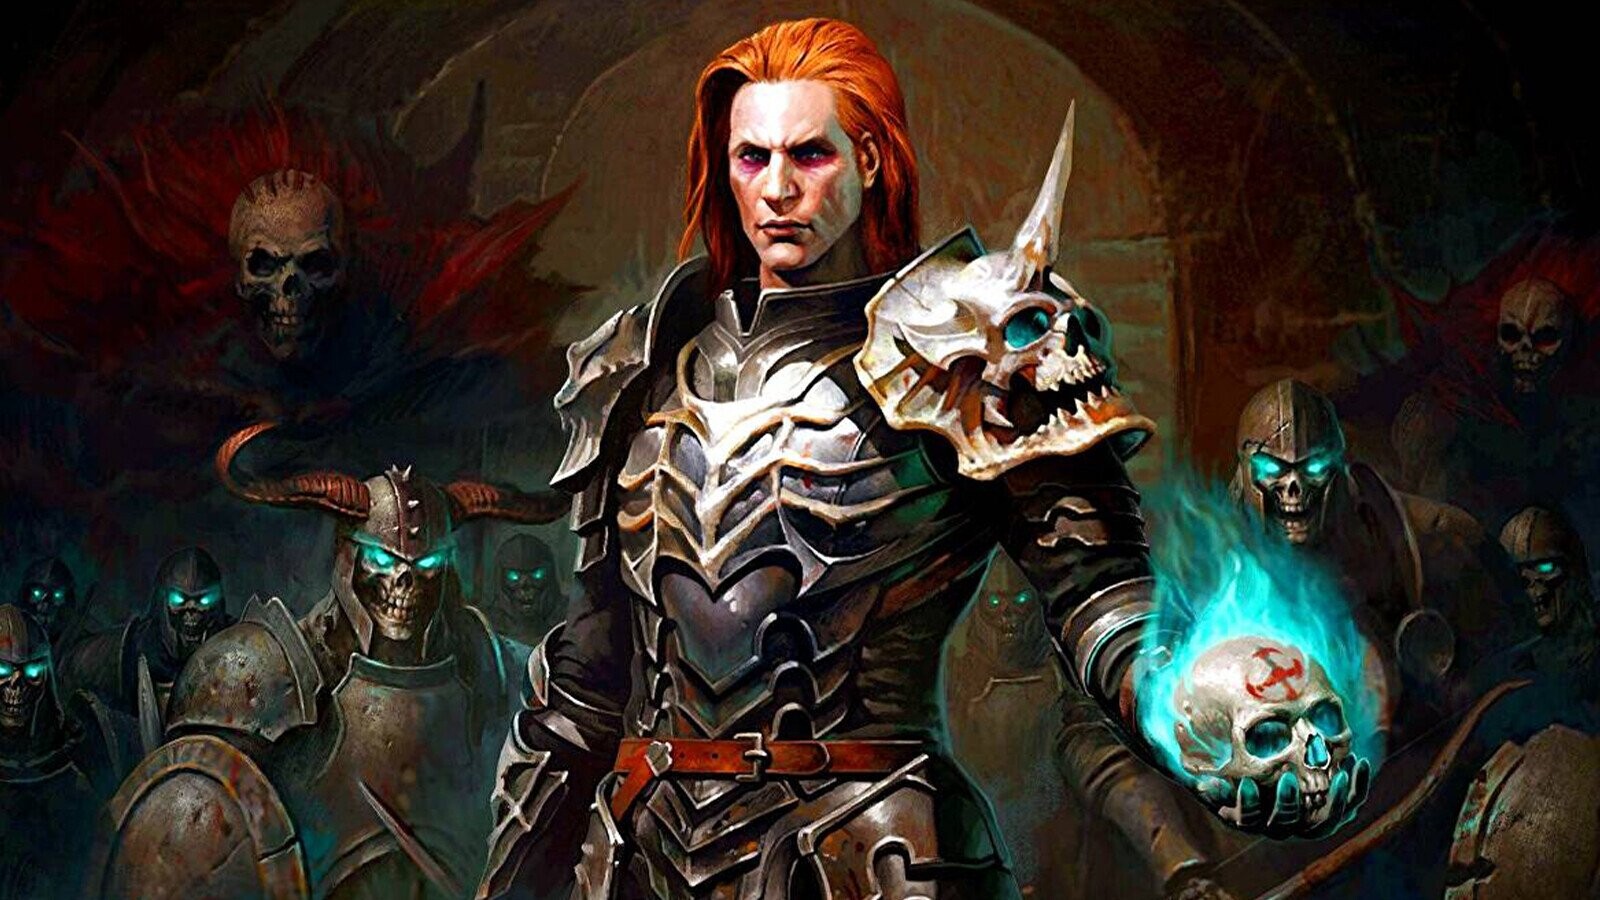 ‘Diablo Immortal’ Player Spends $100K, Becomes Too Powerful To Find Matches